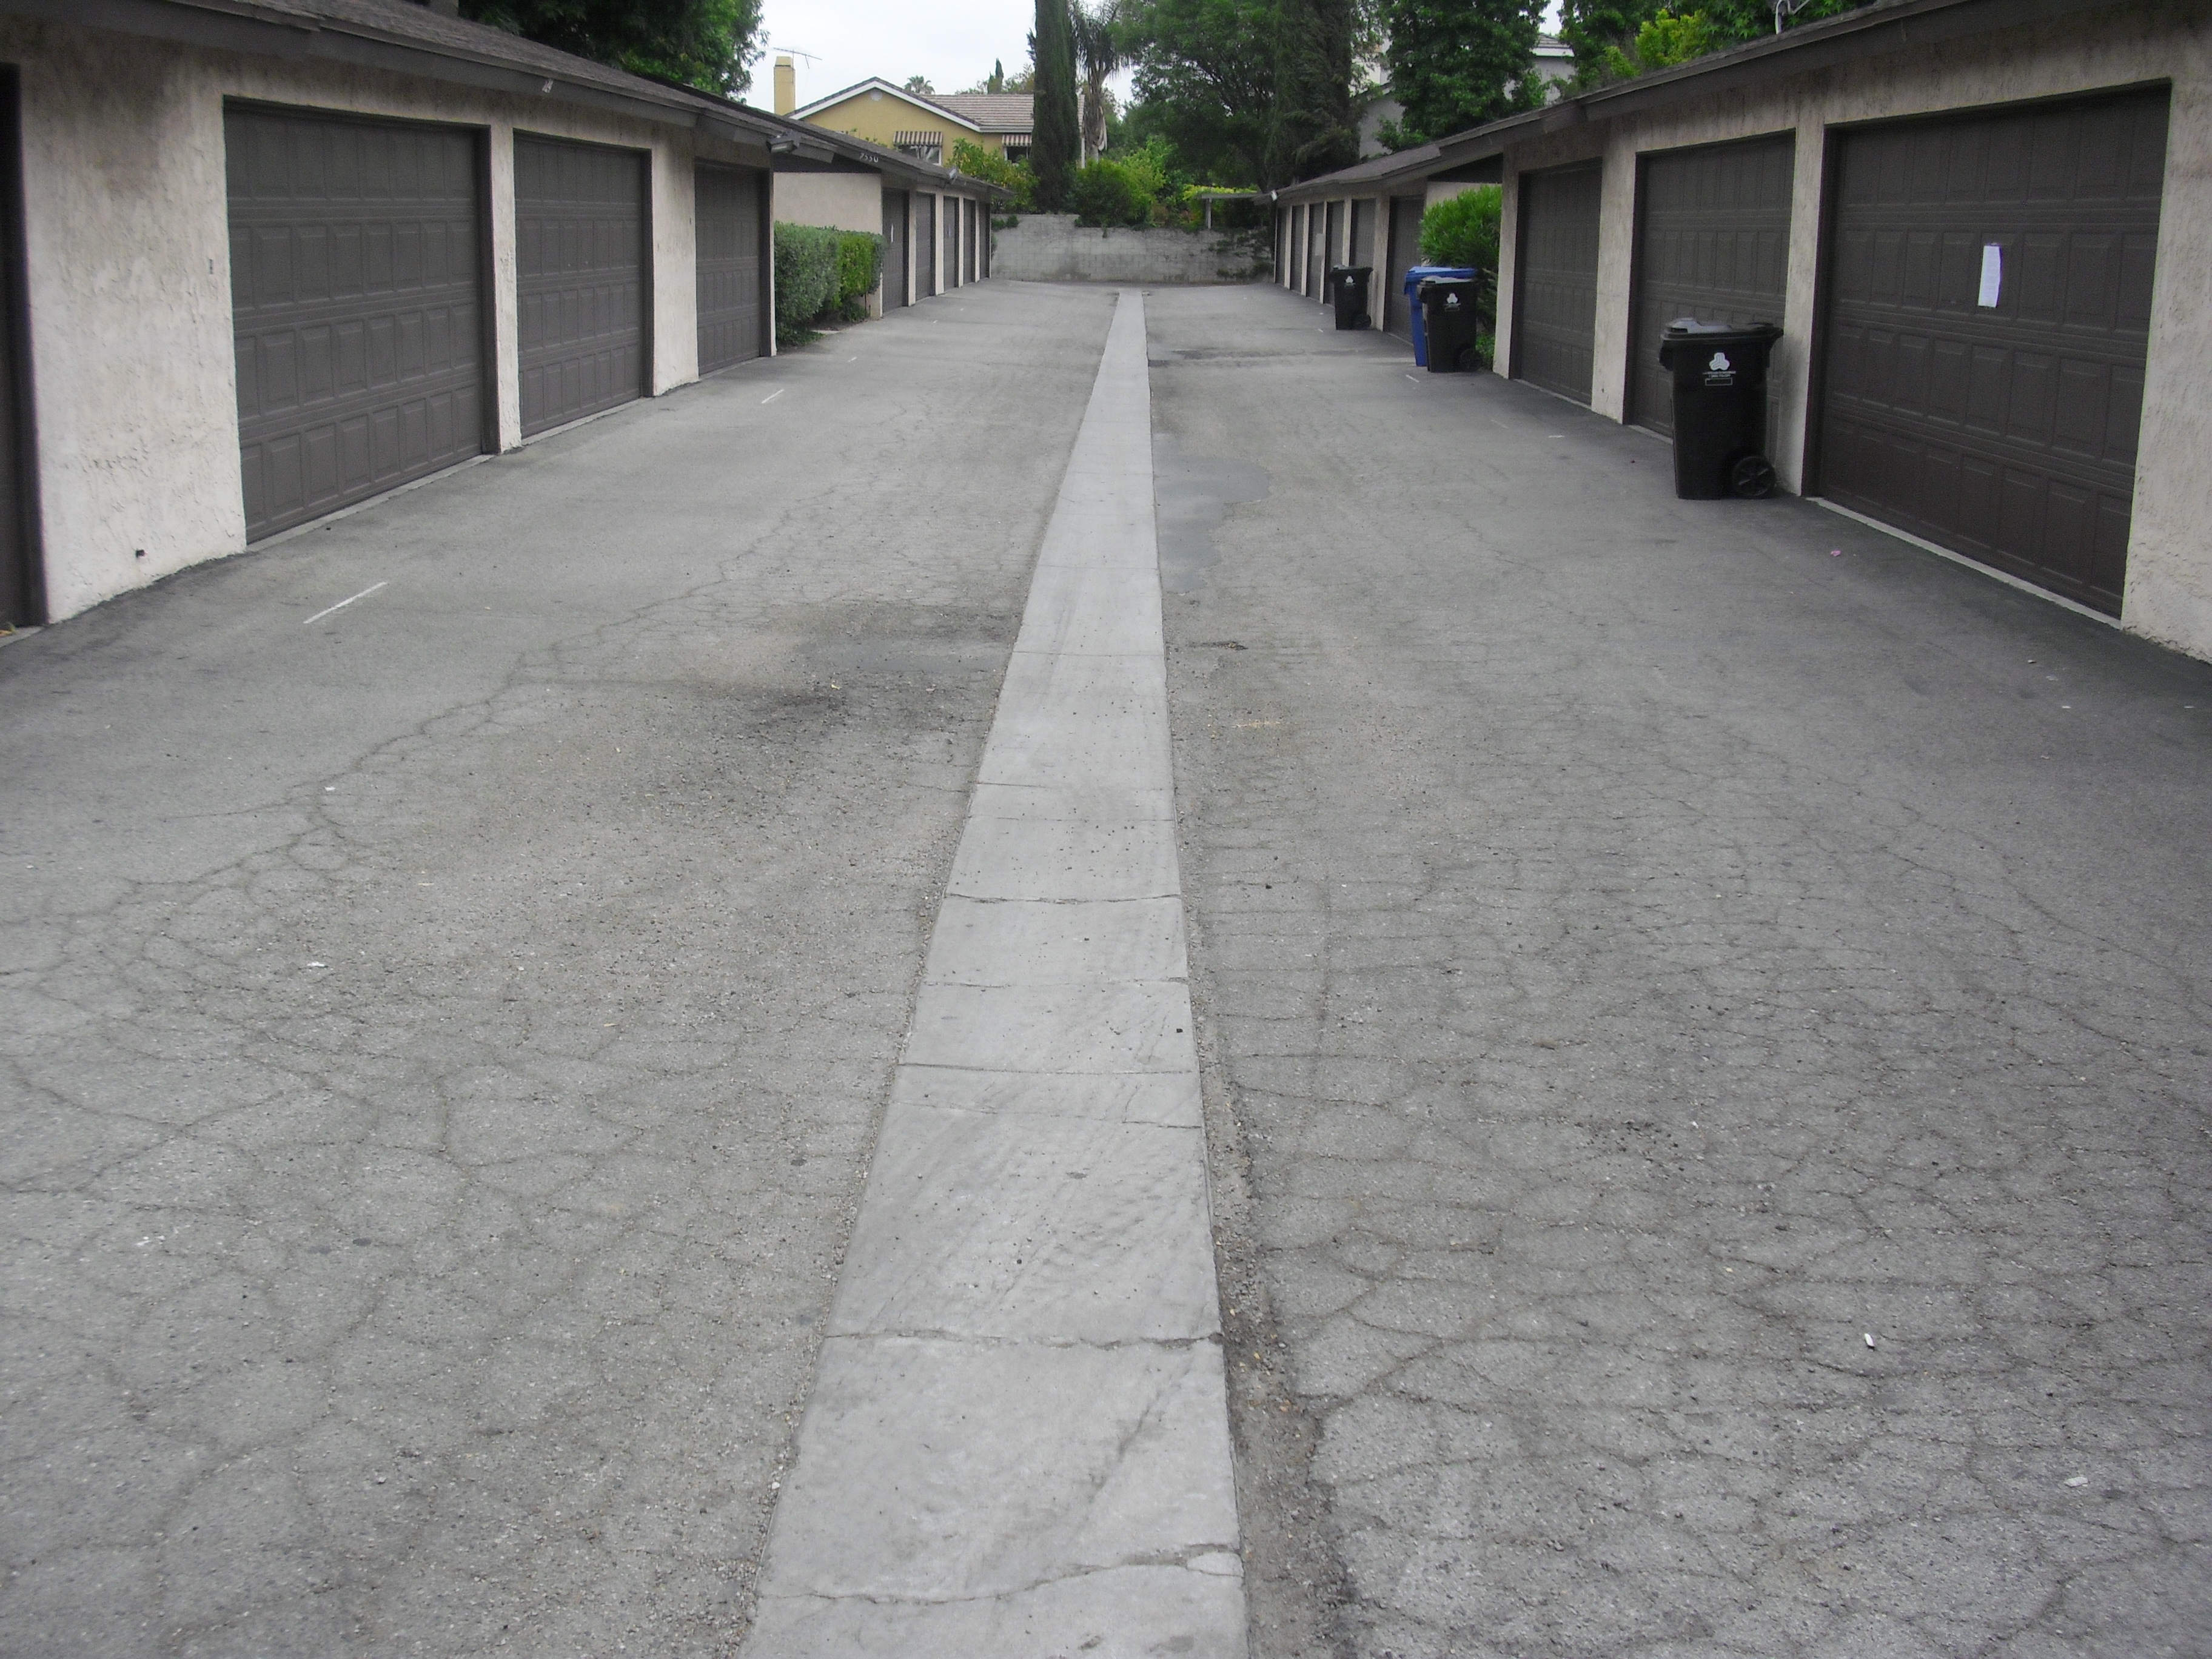 New Asphalt Pavement and Concrete Swell